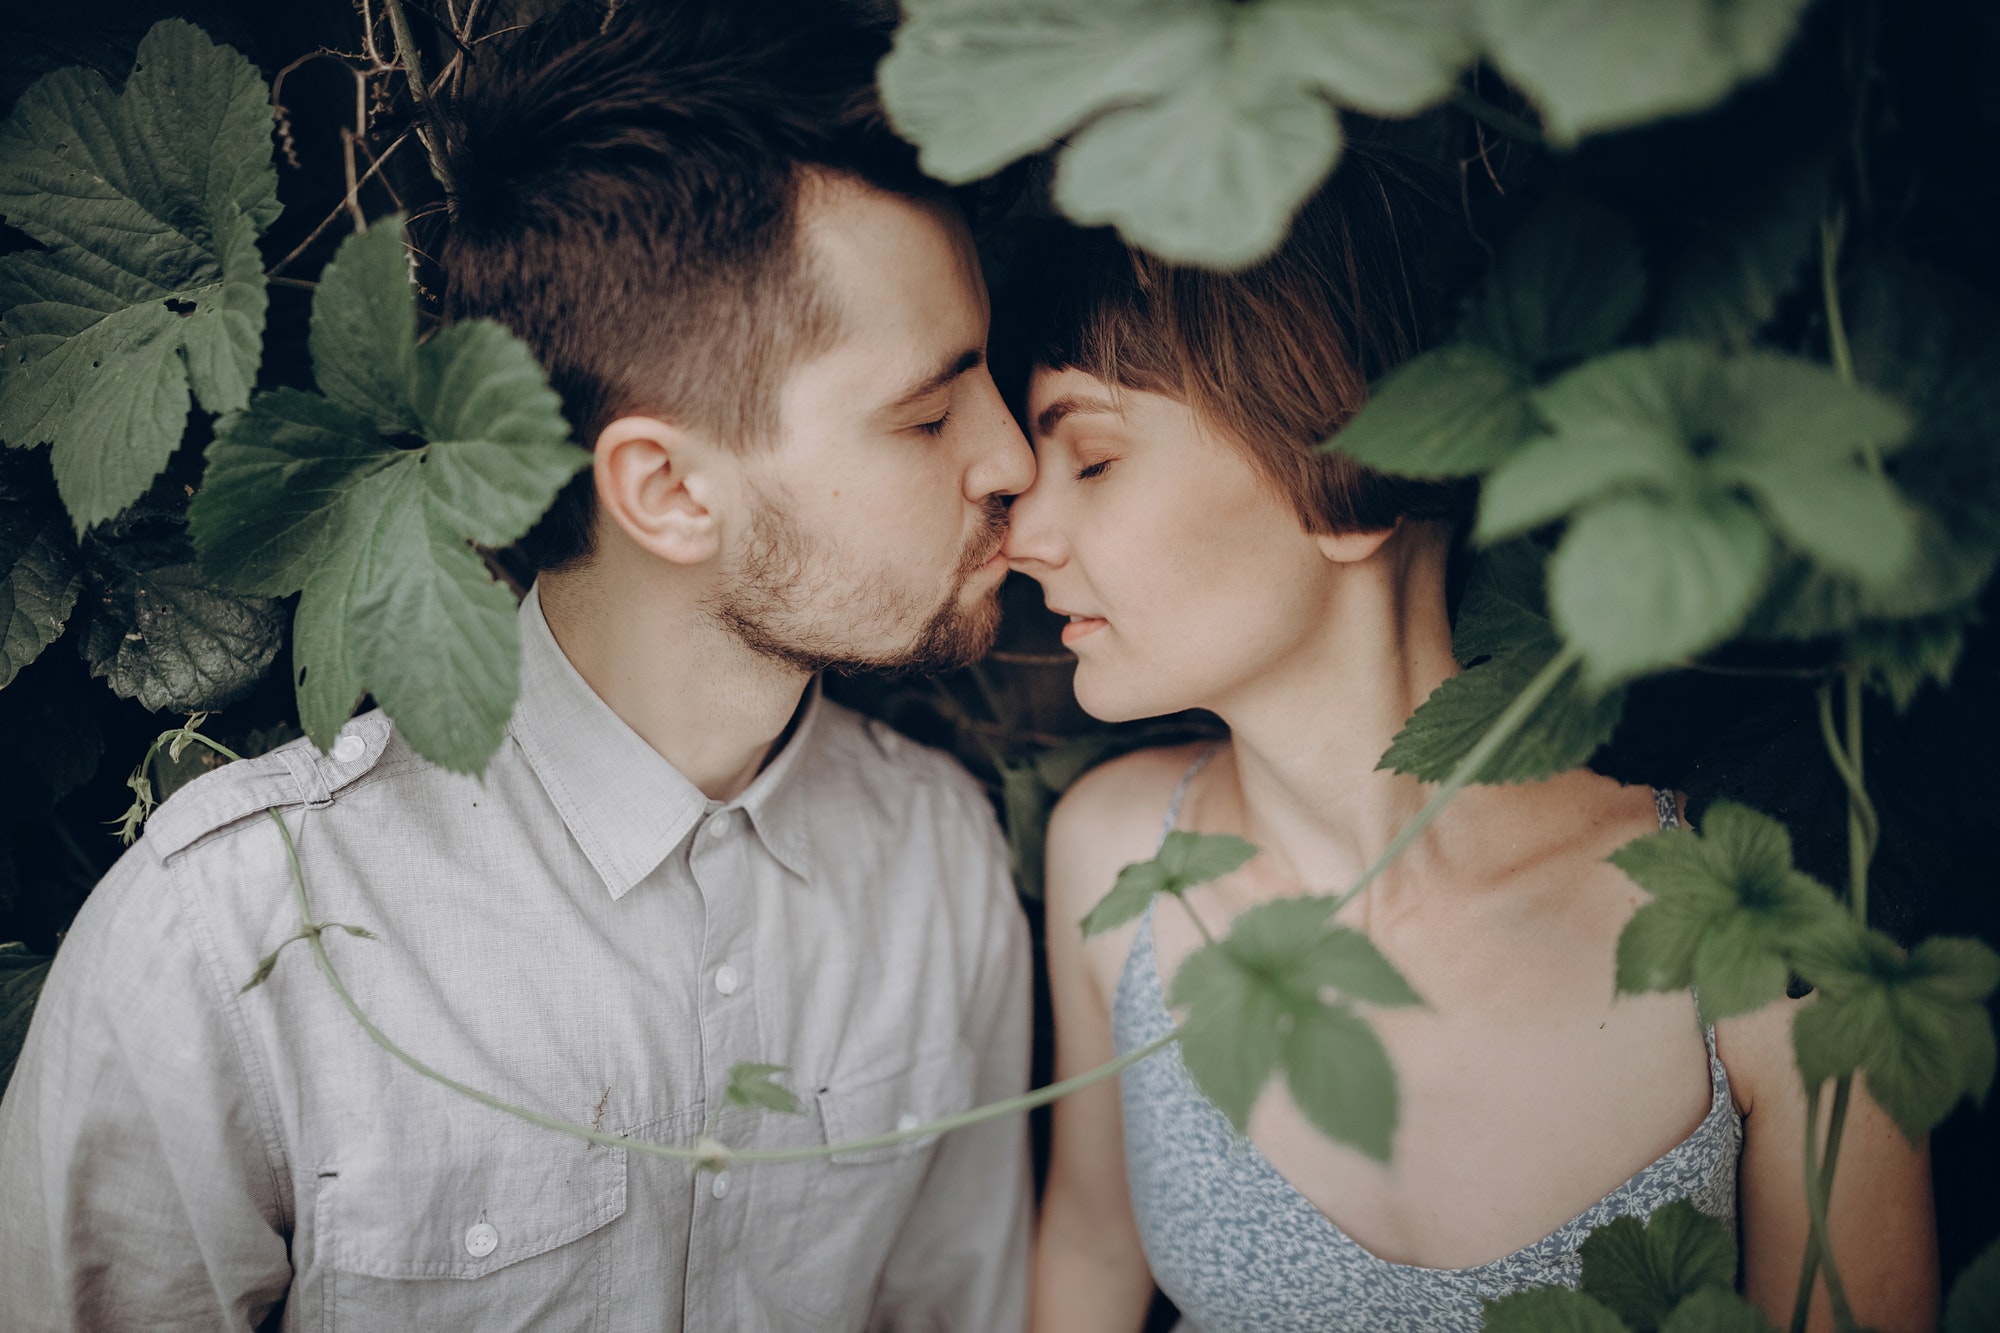 stylish-hipster-couple-kissing-in-green-leaves-holding-hands.jpg